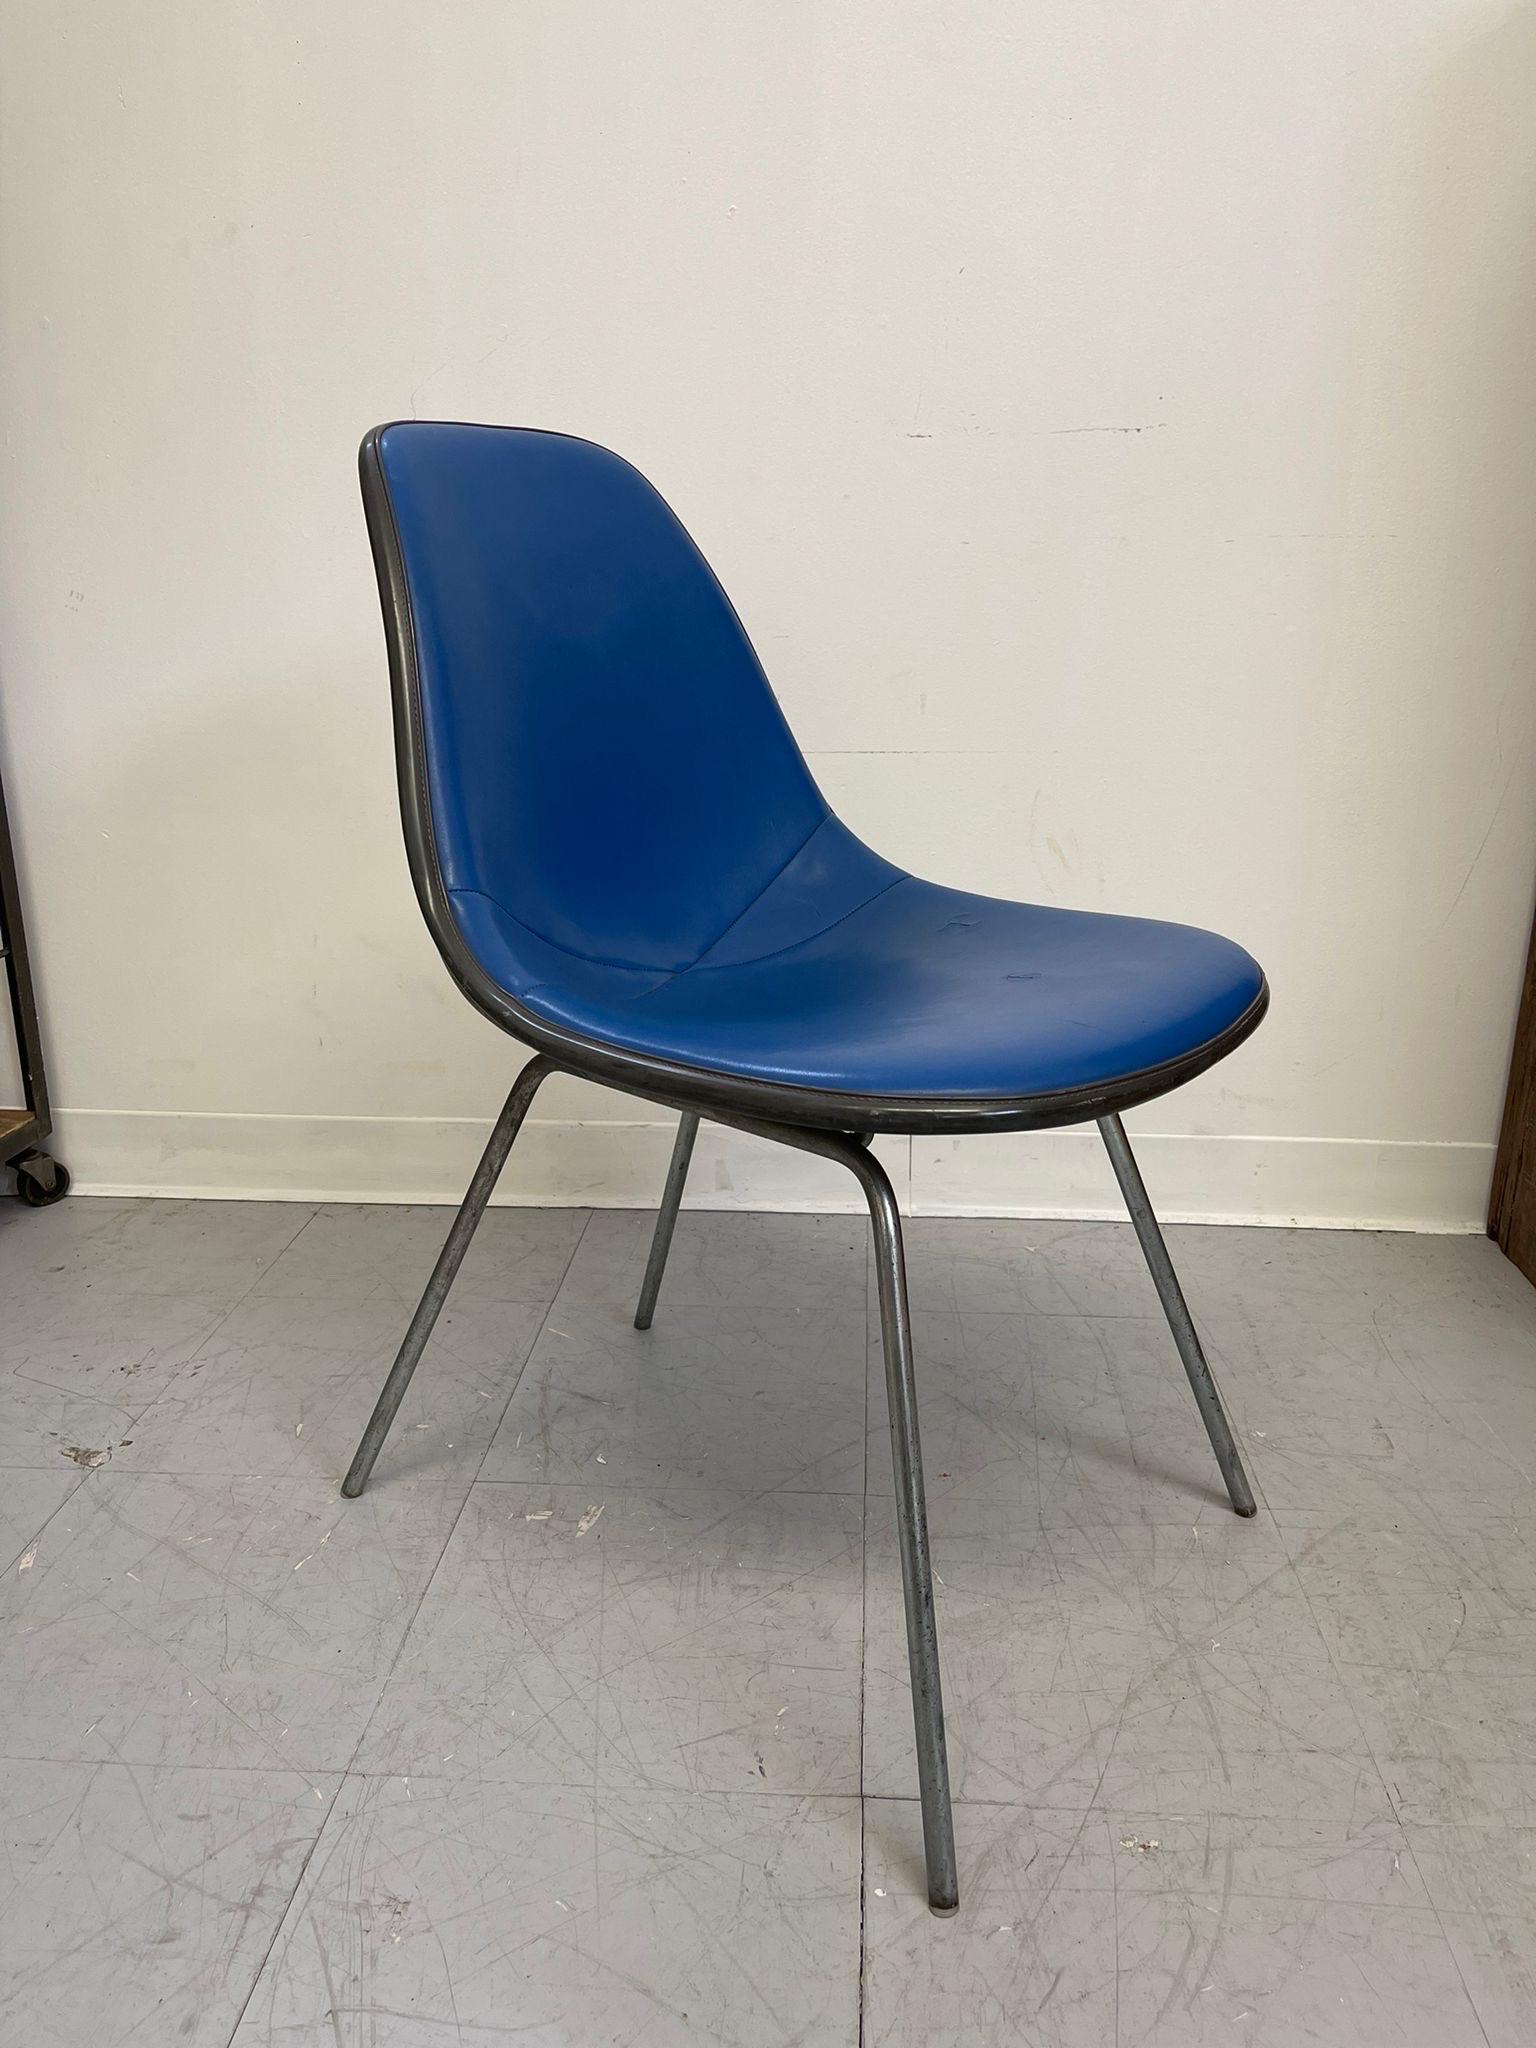 This Herman Moller Chair with Black Edging on upholstery. Possibly Leather or Vinyl Seat . Possible Fiber Glass Backing. Makers Mark and Serial Number are on the Bottom. Wear and Tear Consistent with Age 

Dimensions. 22 W ; 19 D ; 31 H
Seat Height.